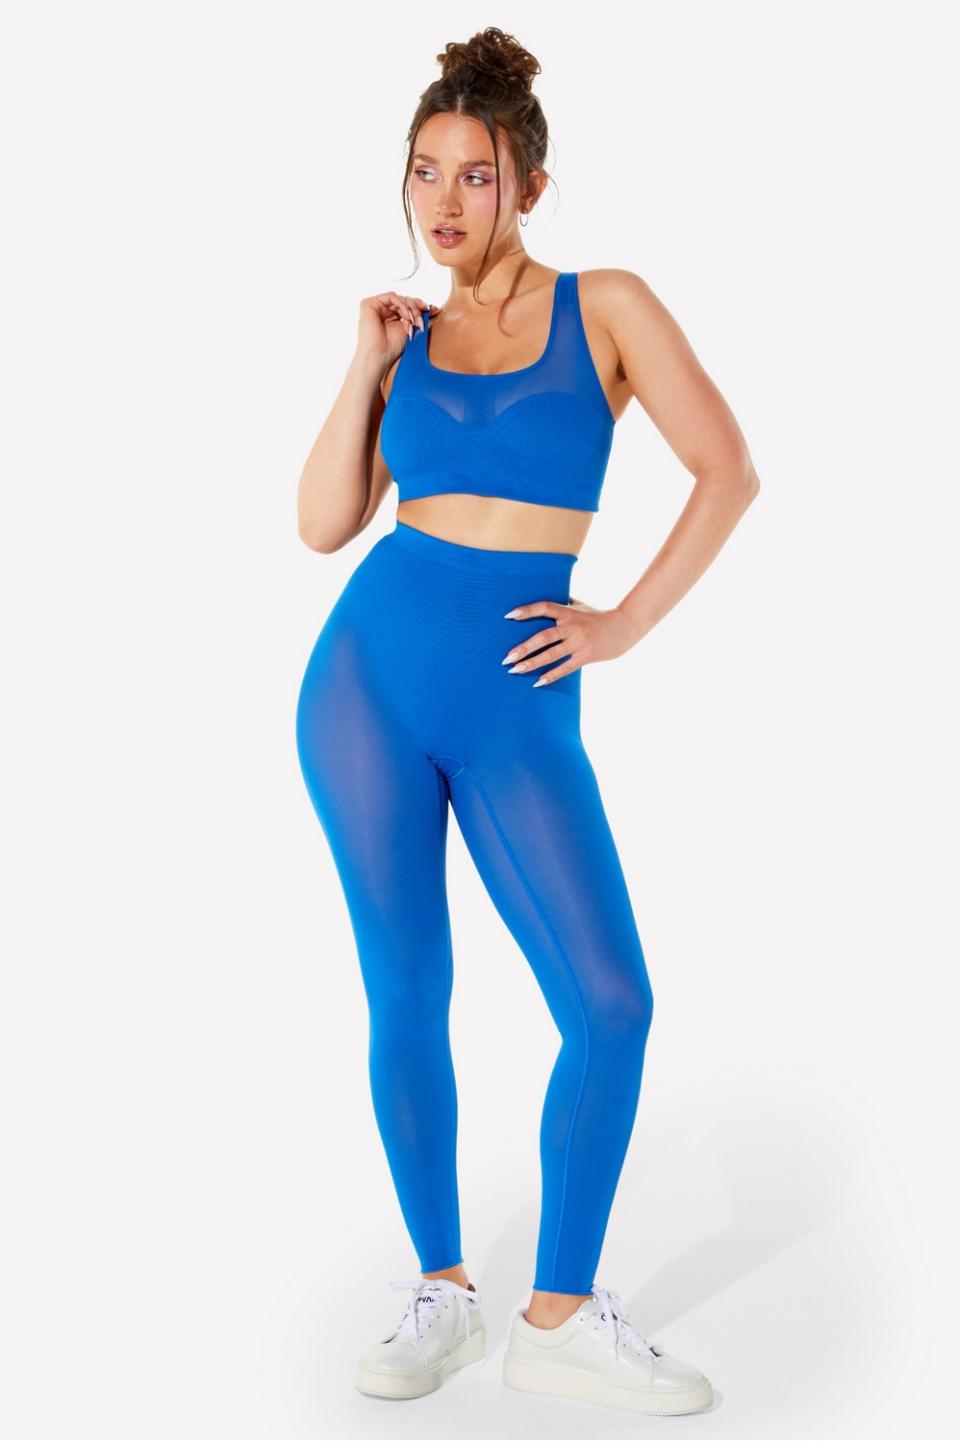 model wearing blue mesh leggings with matching sports bra and white sneakers